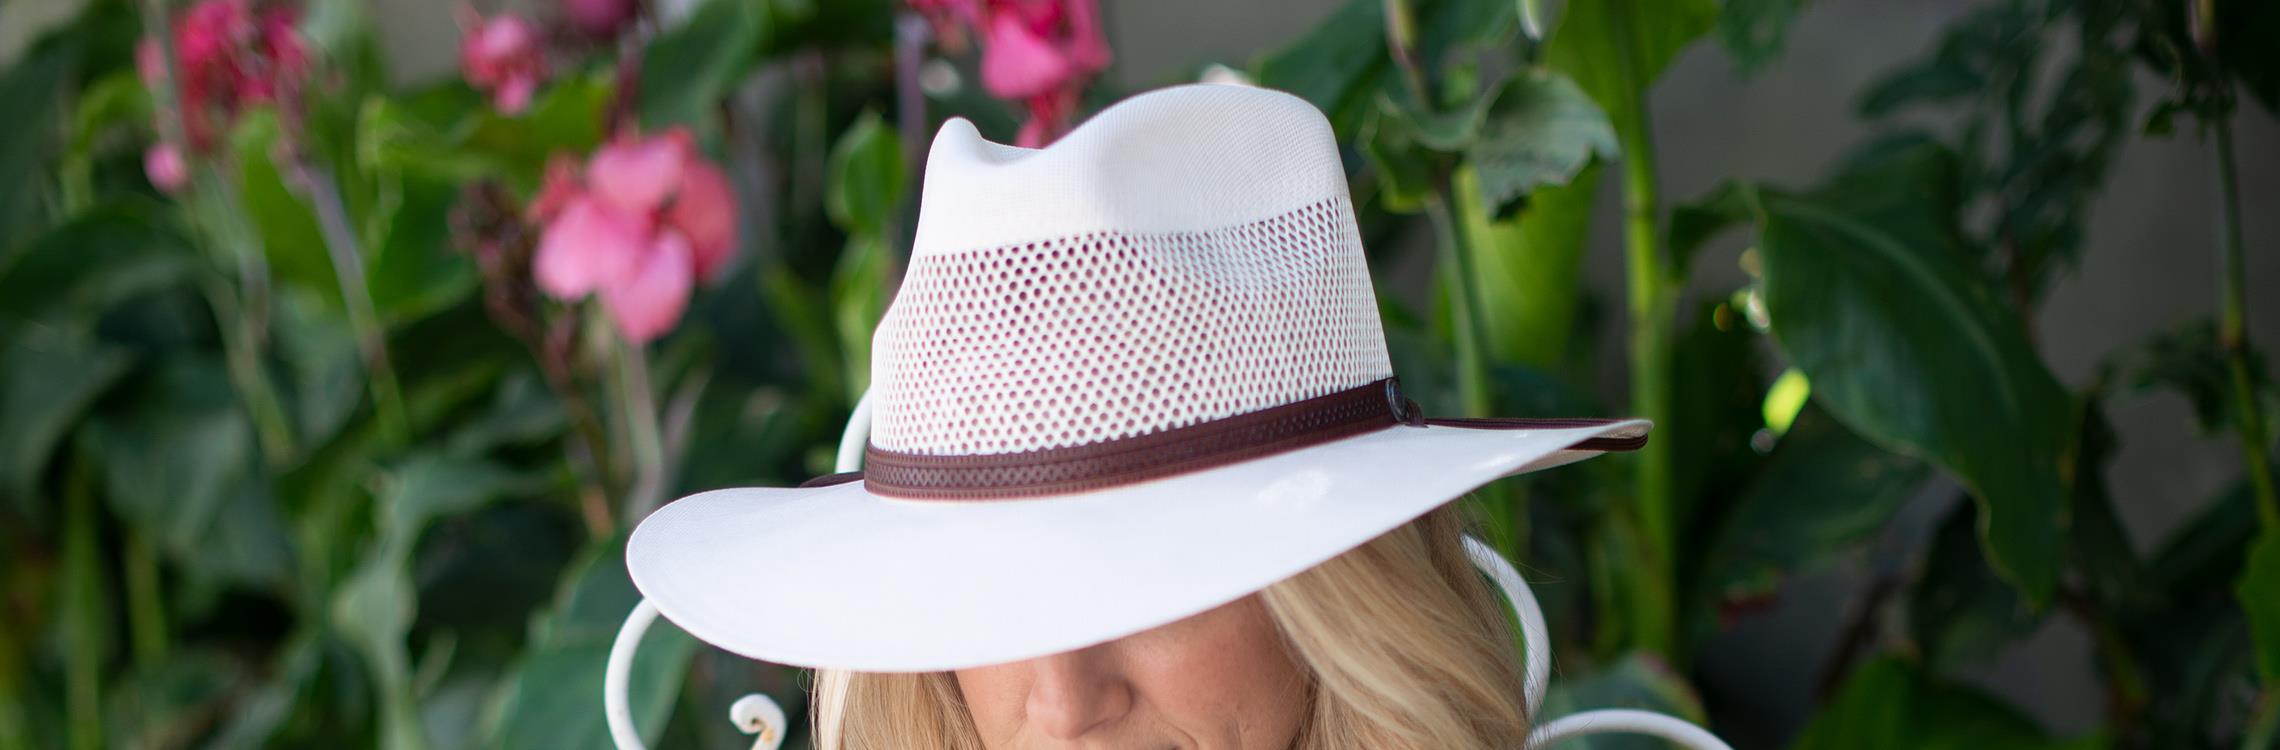 How to Clean a Straw Hat: Remove Stains and Dirt